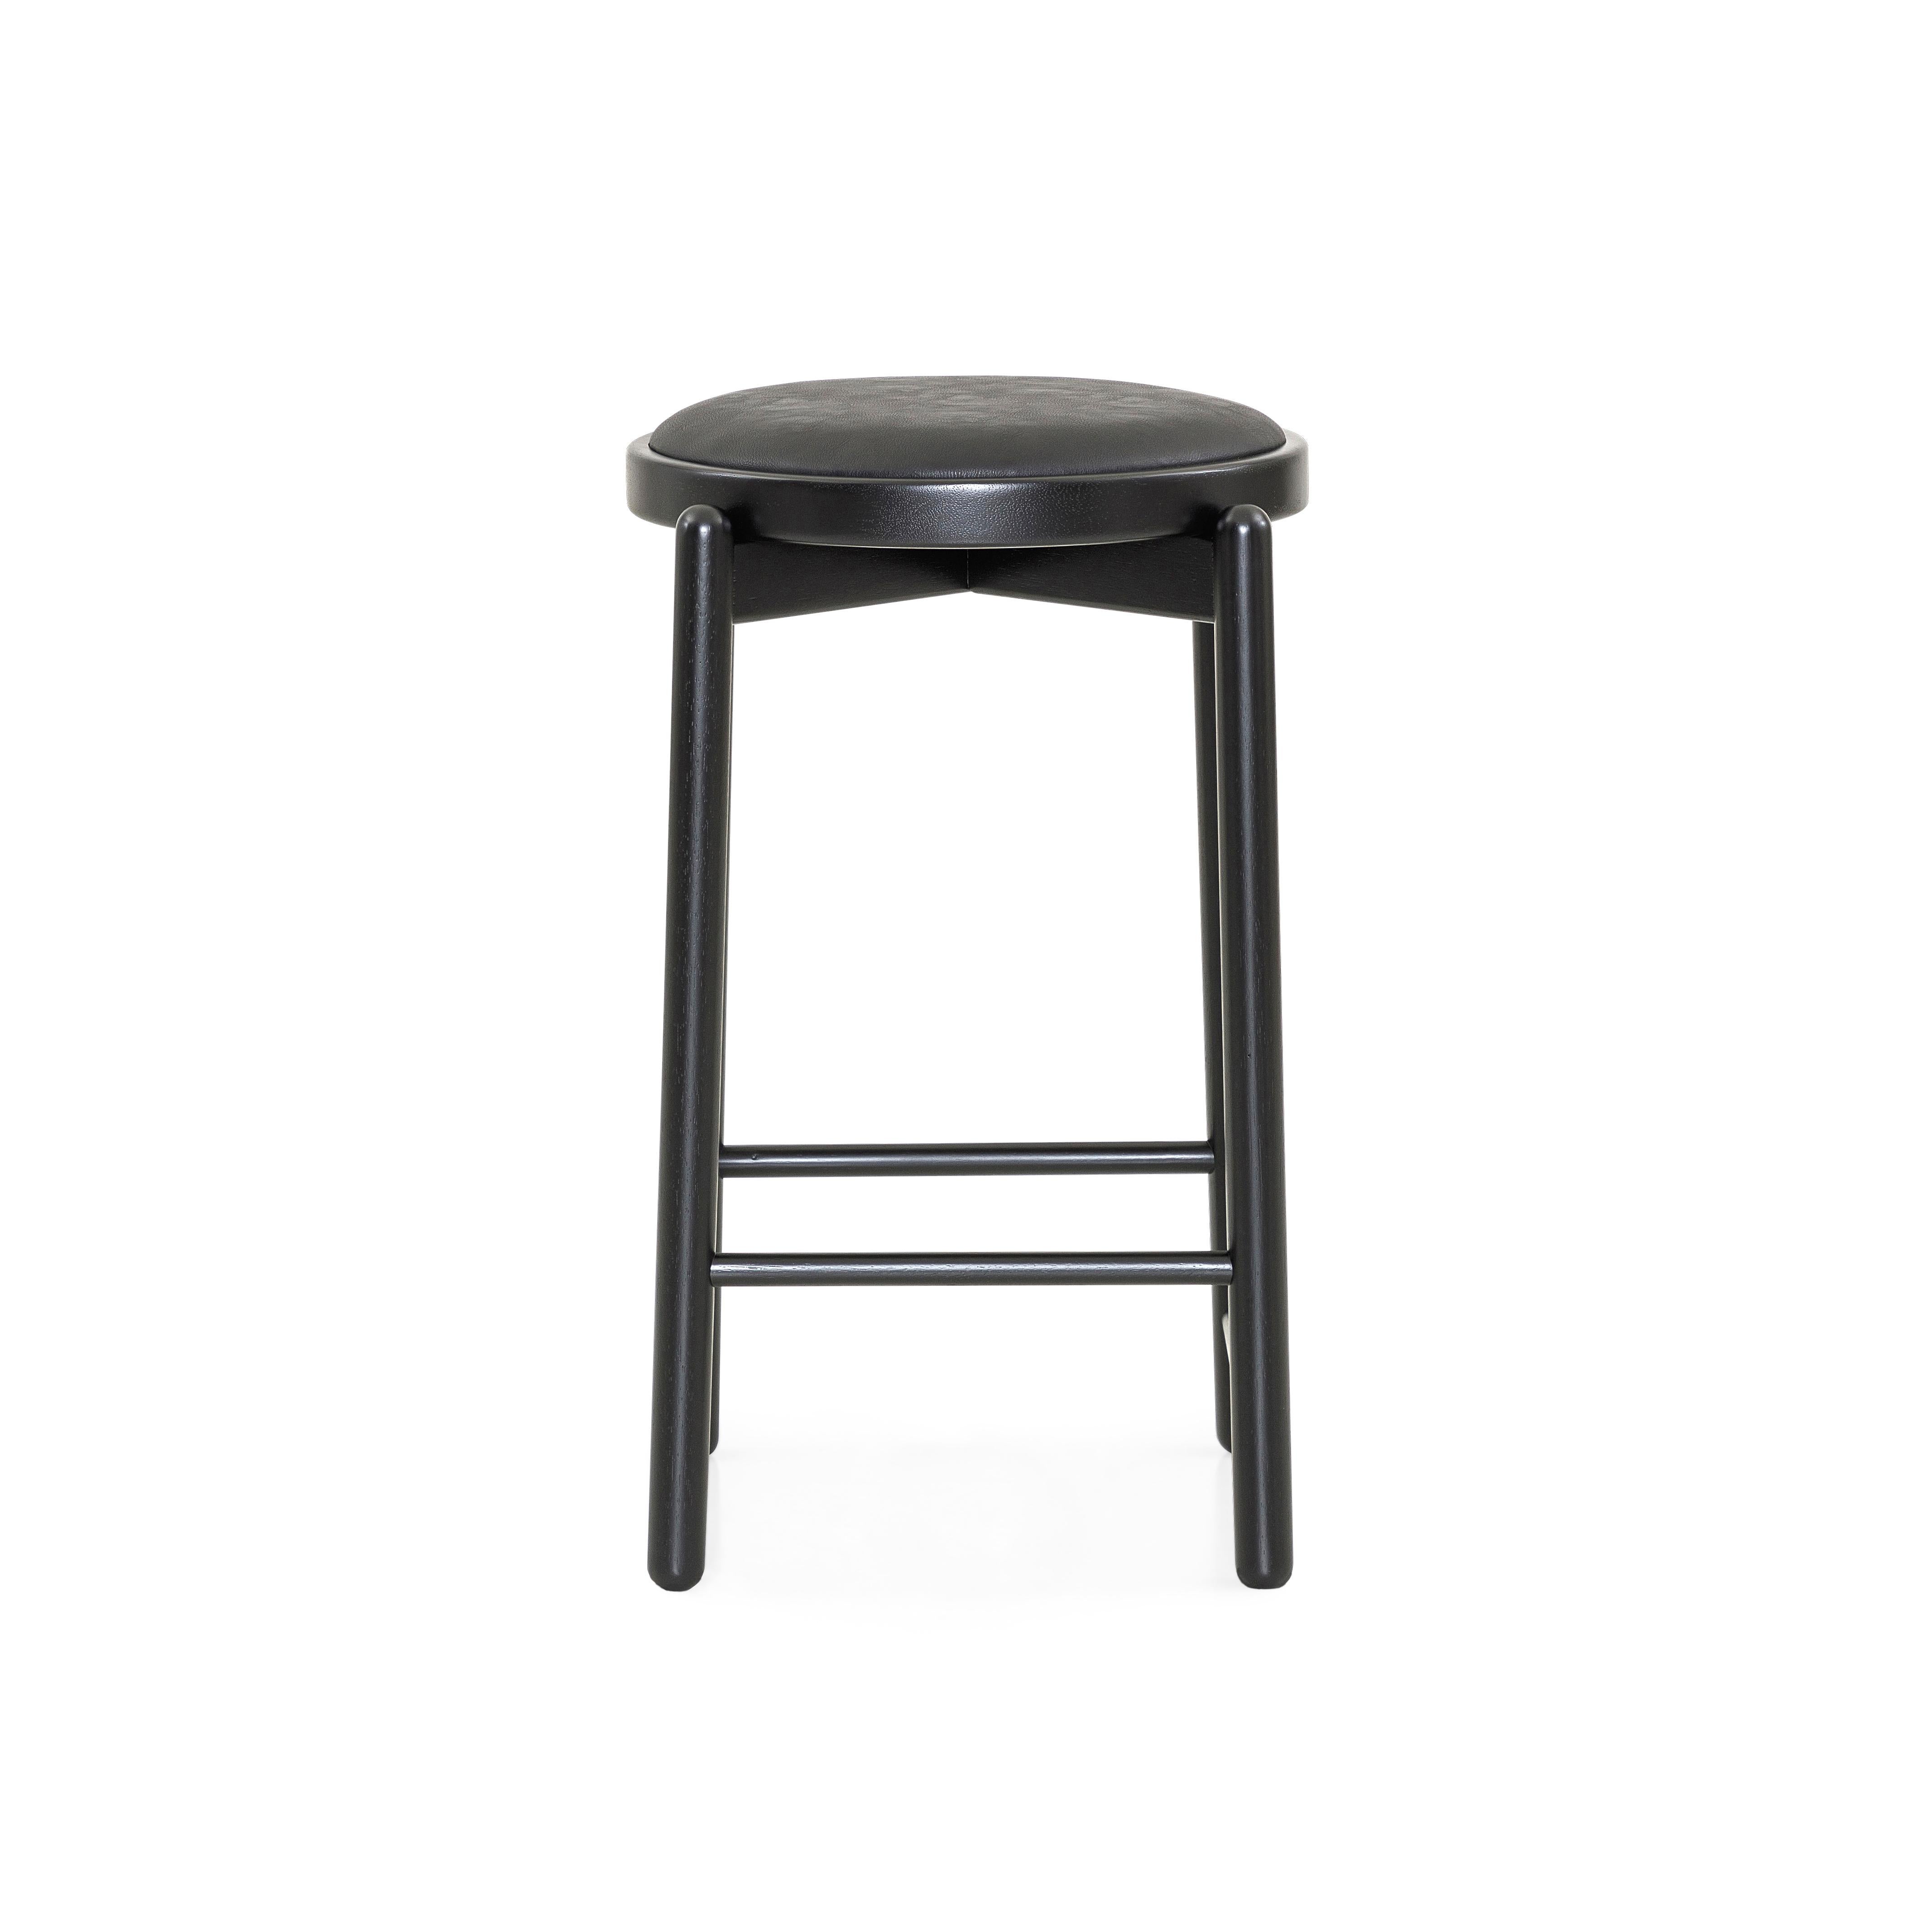 Our Uultis team has designed this Maru counter stool in a black wood base with a matching upholstered black cushioned seat that will stop being only a decoration counter stool to become part of the day-to-day lives of those who experience enriching